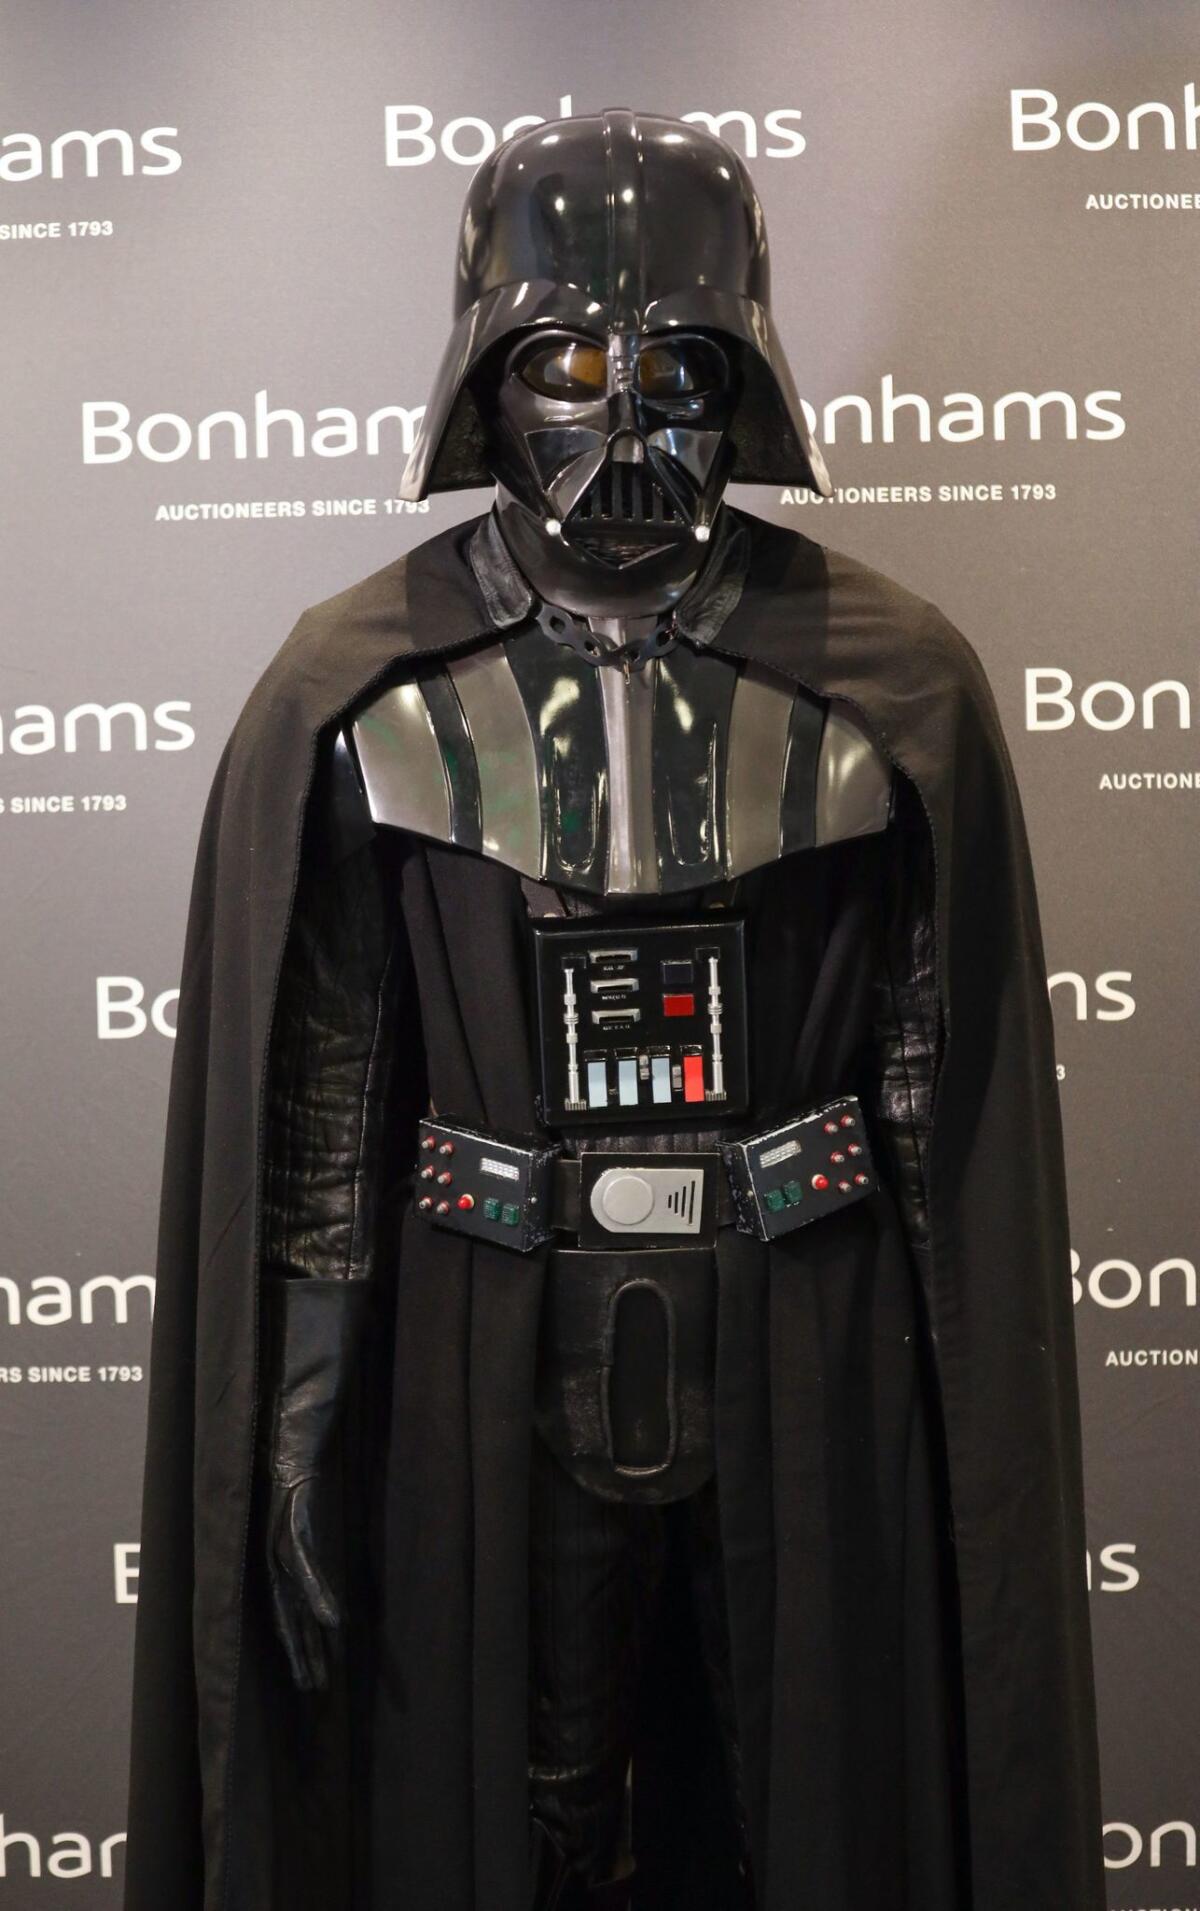 A Darth Vader costume from "Star Wars."